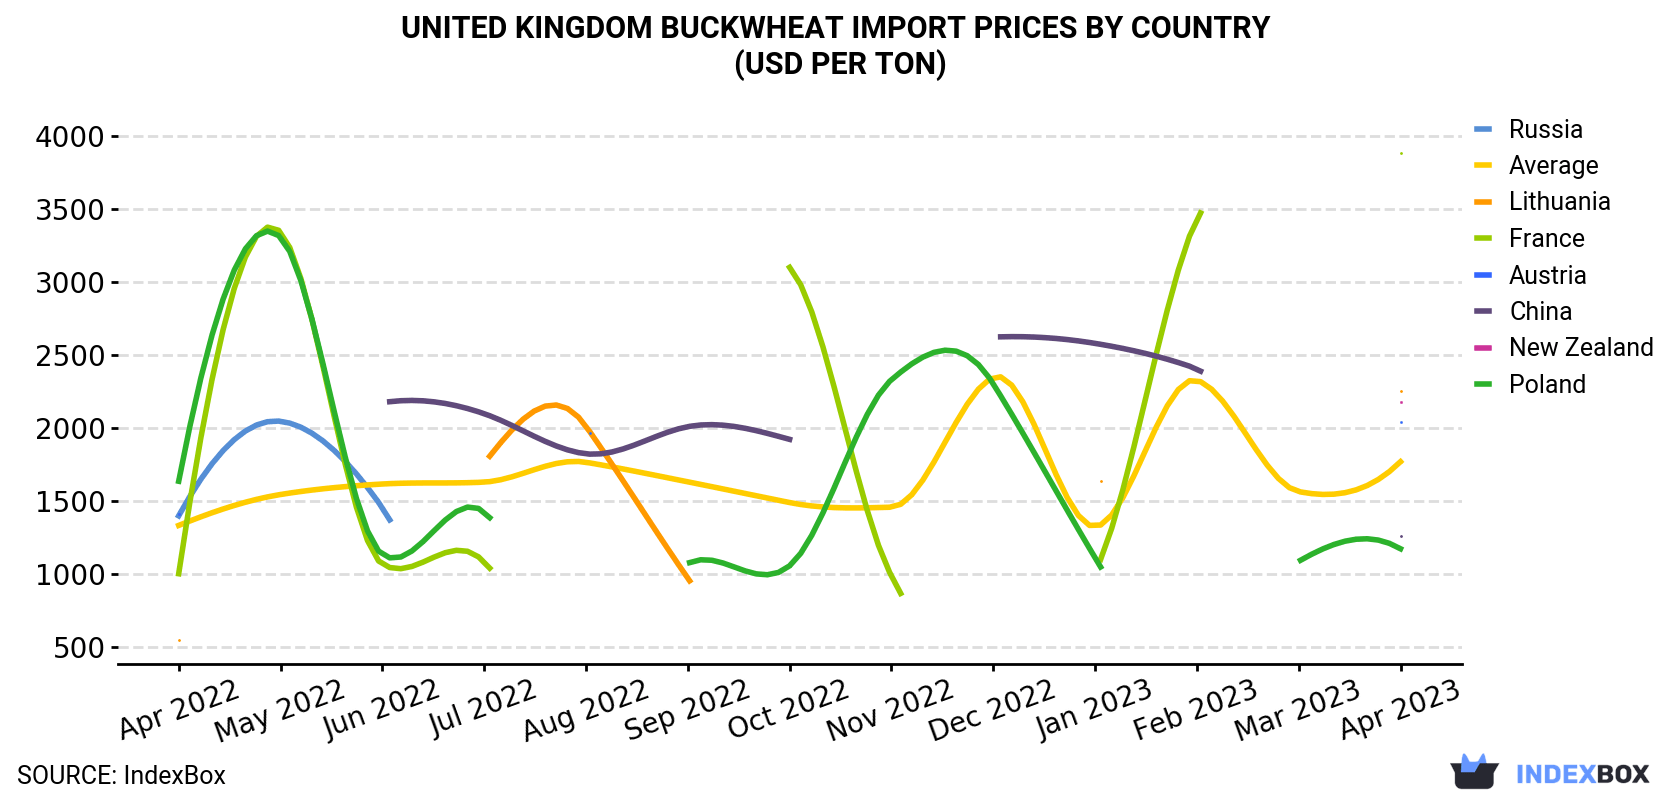 United Kingdom Buckwheat Import Prices By Country (USD Per Ton)